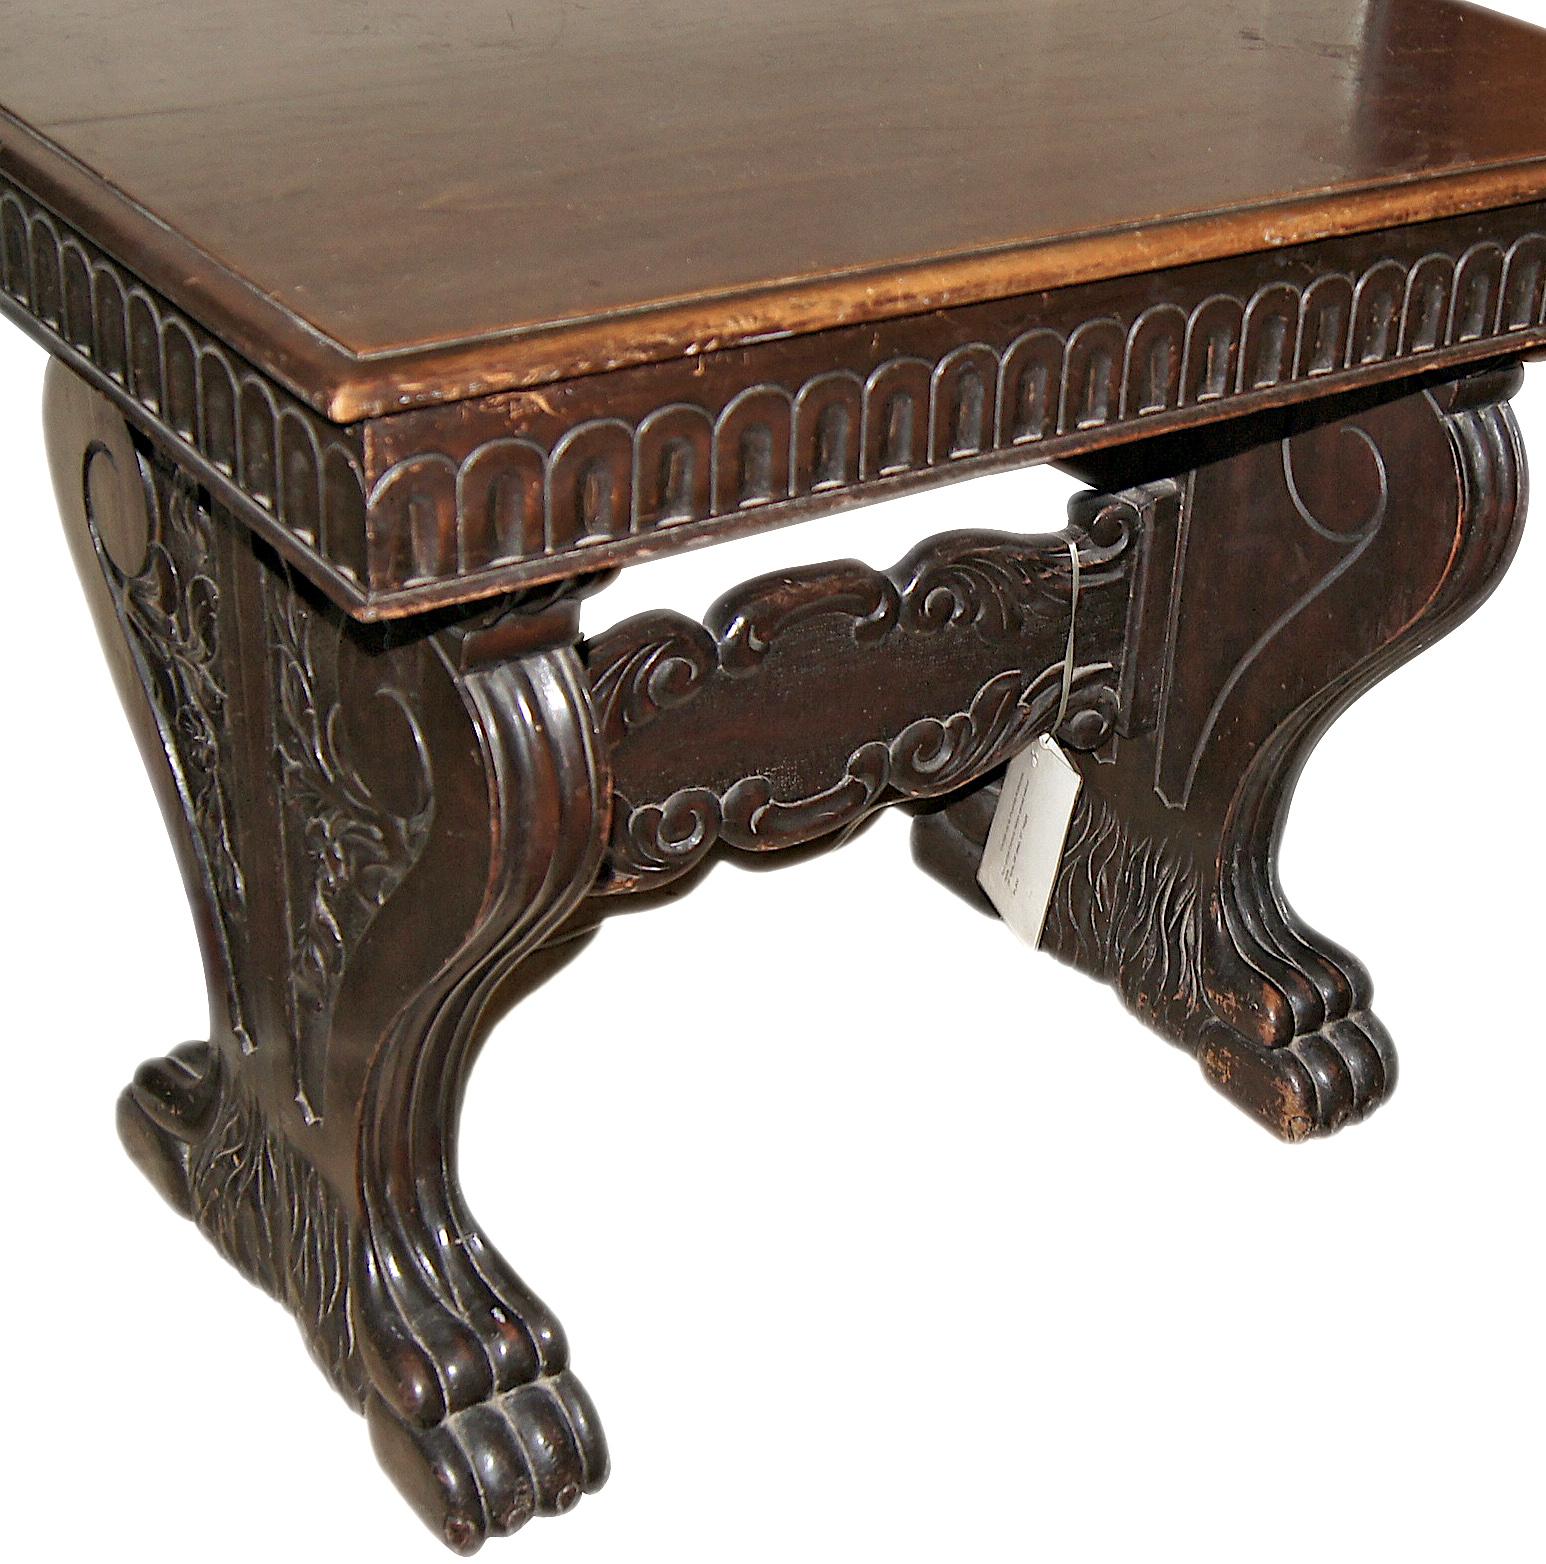 Circa 1900 Italian carved walnut table with lion's paw feet, scrolling motif on sides and drawers in apron.

Measurements:
Height 31.75